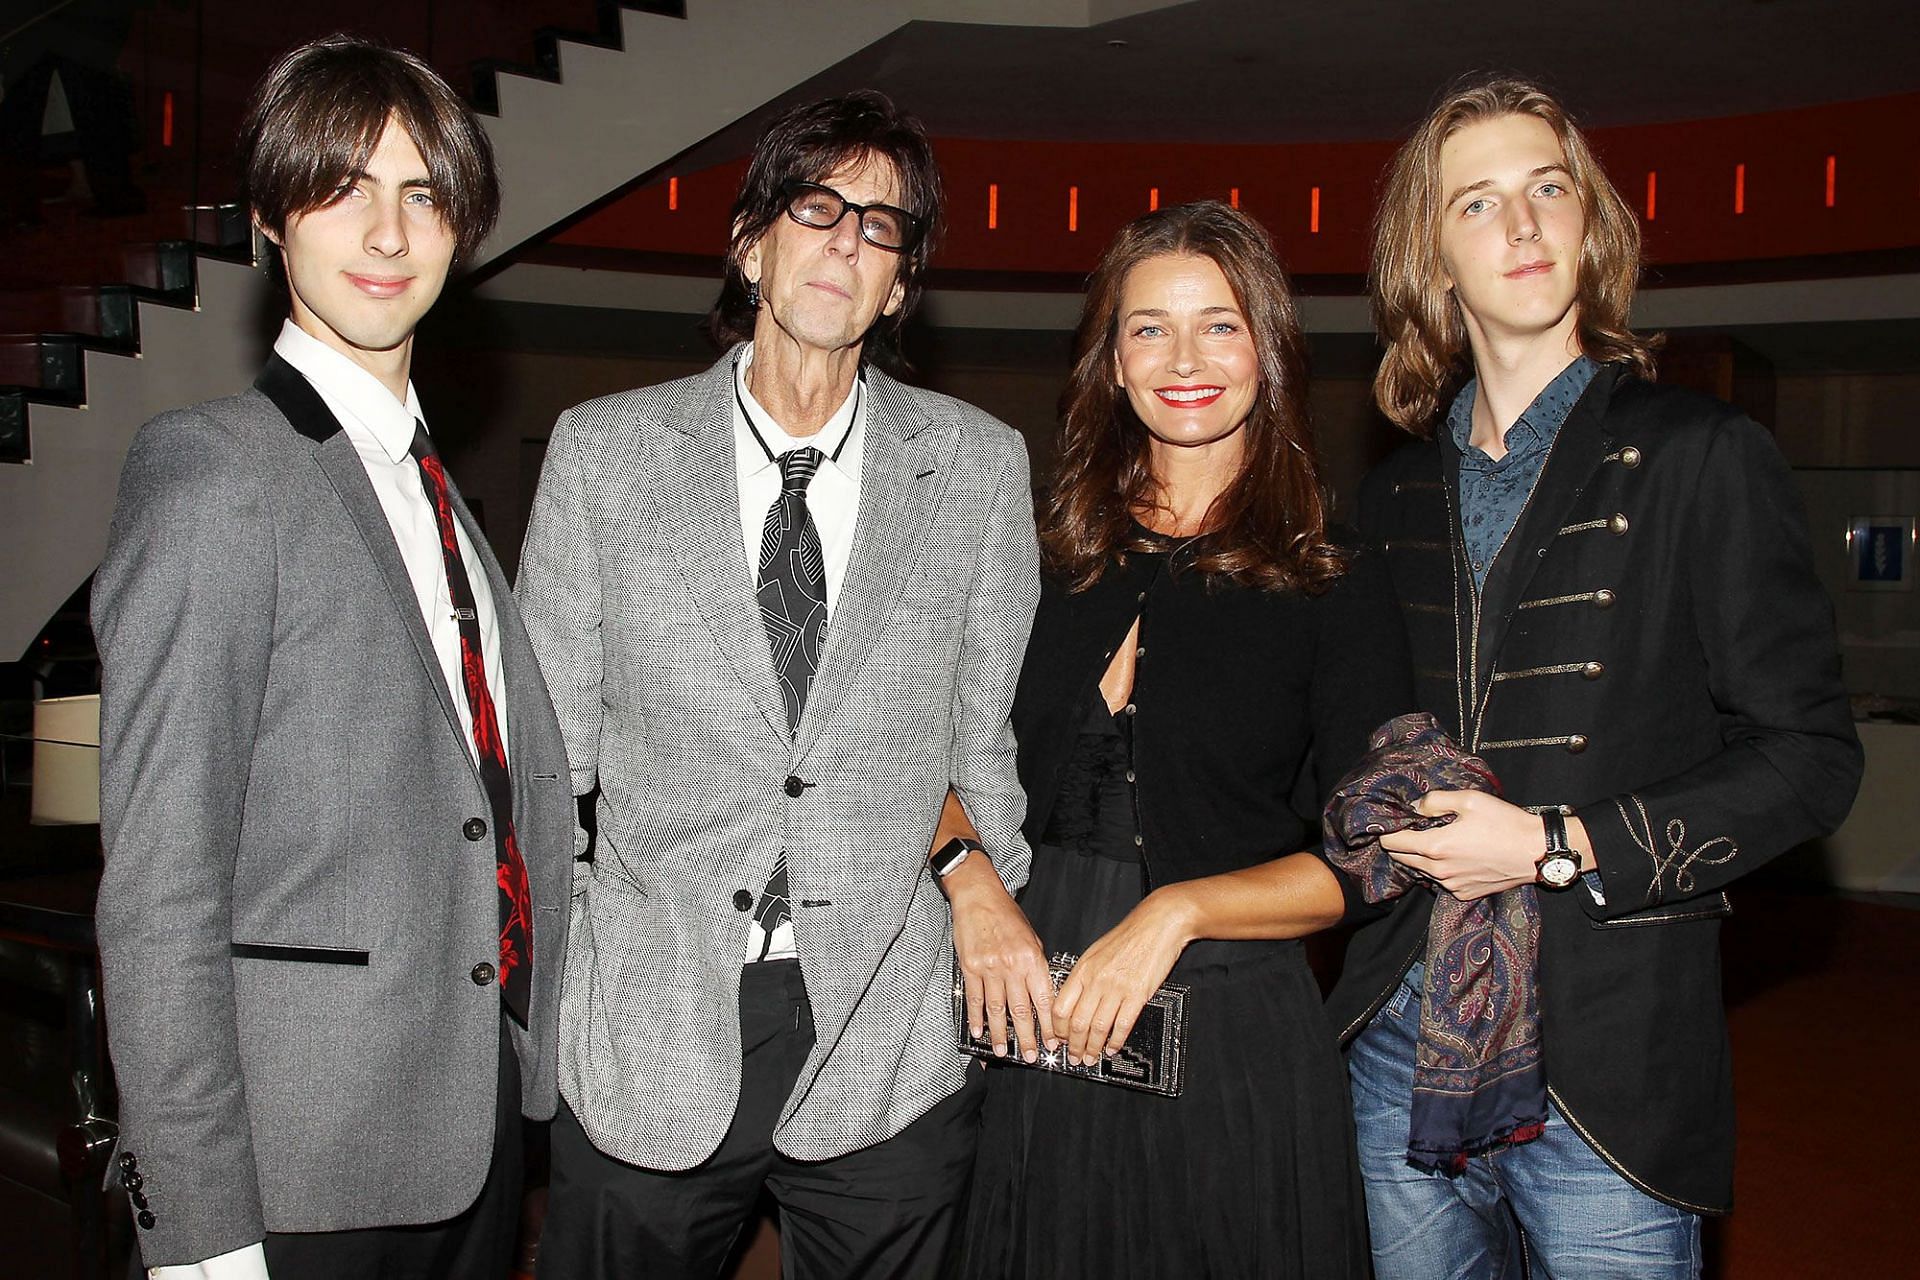 Paulina and Ocasek with their two children (image via Dave Allocca)